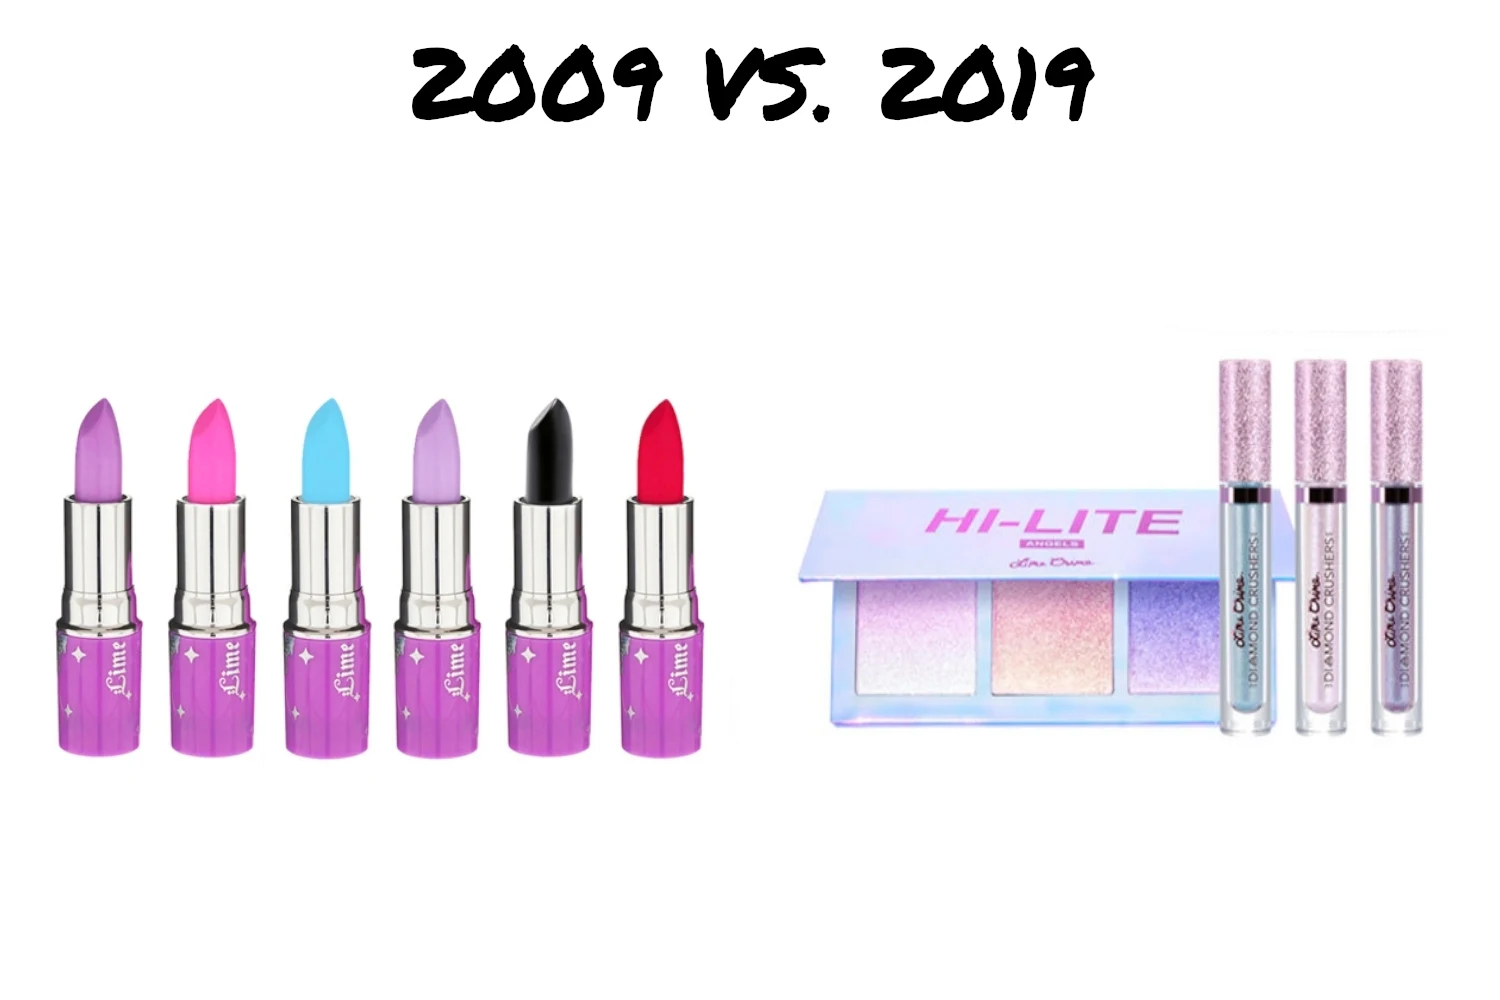 makeup collage showin how th emakeup industry have changed for the past 10 years #10yearschallenge